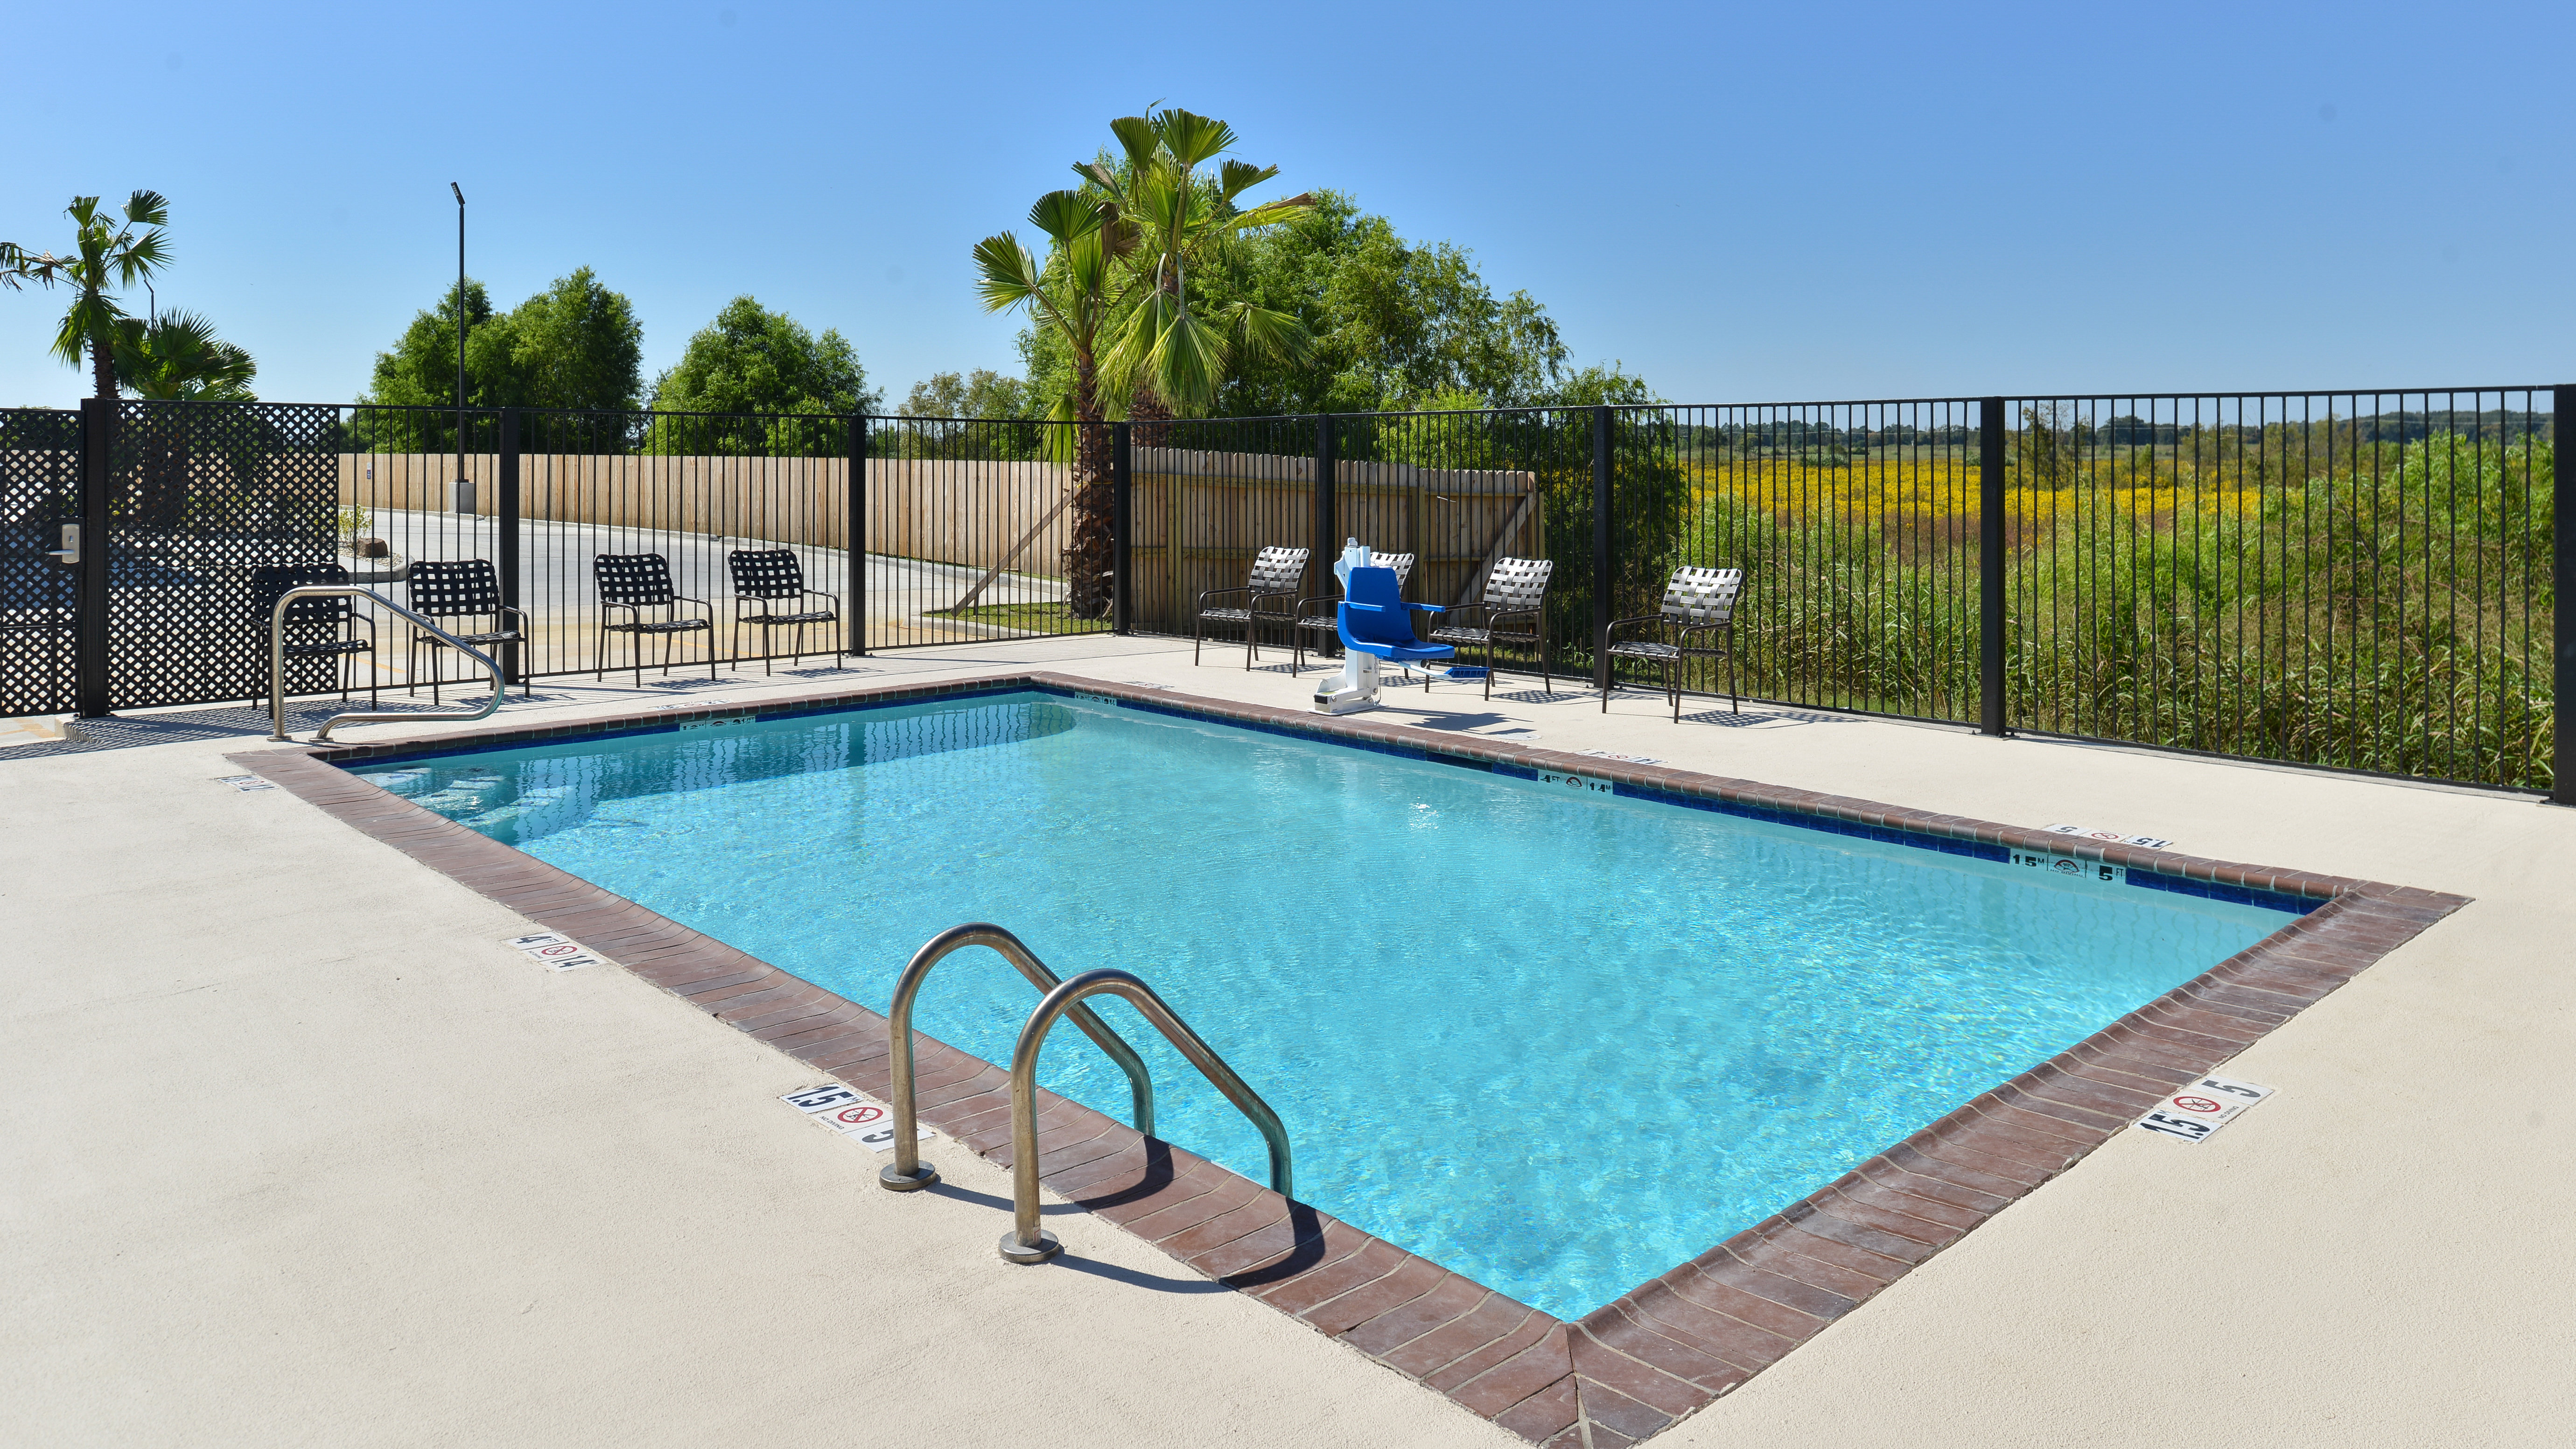 Candlewood Suites Houma Outdoor Swimming Pool and Lounge Chairs